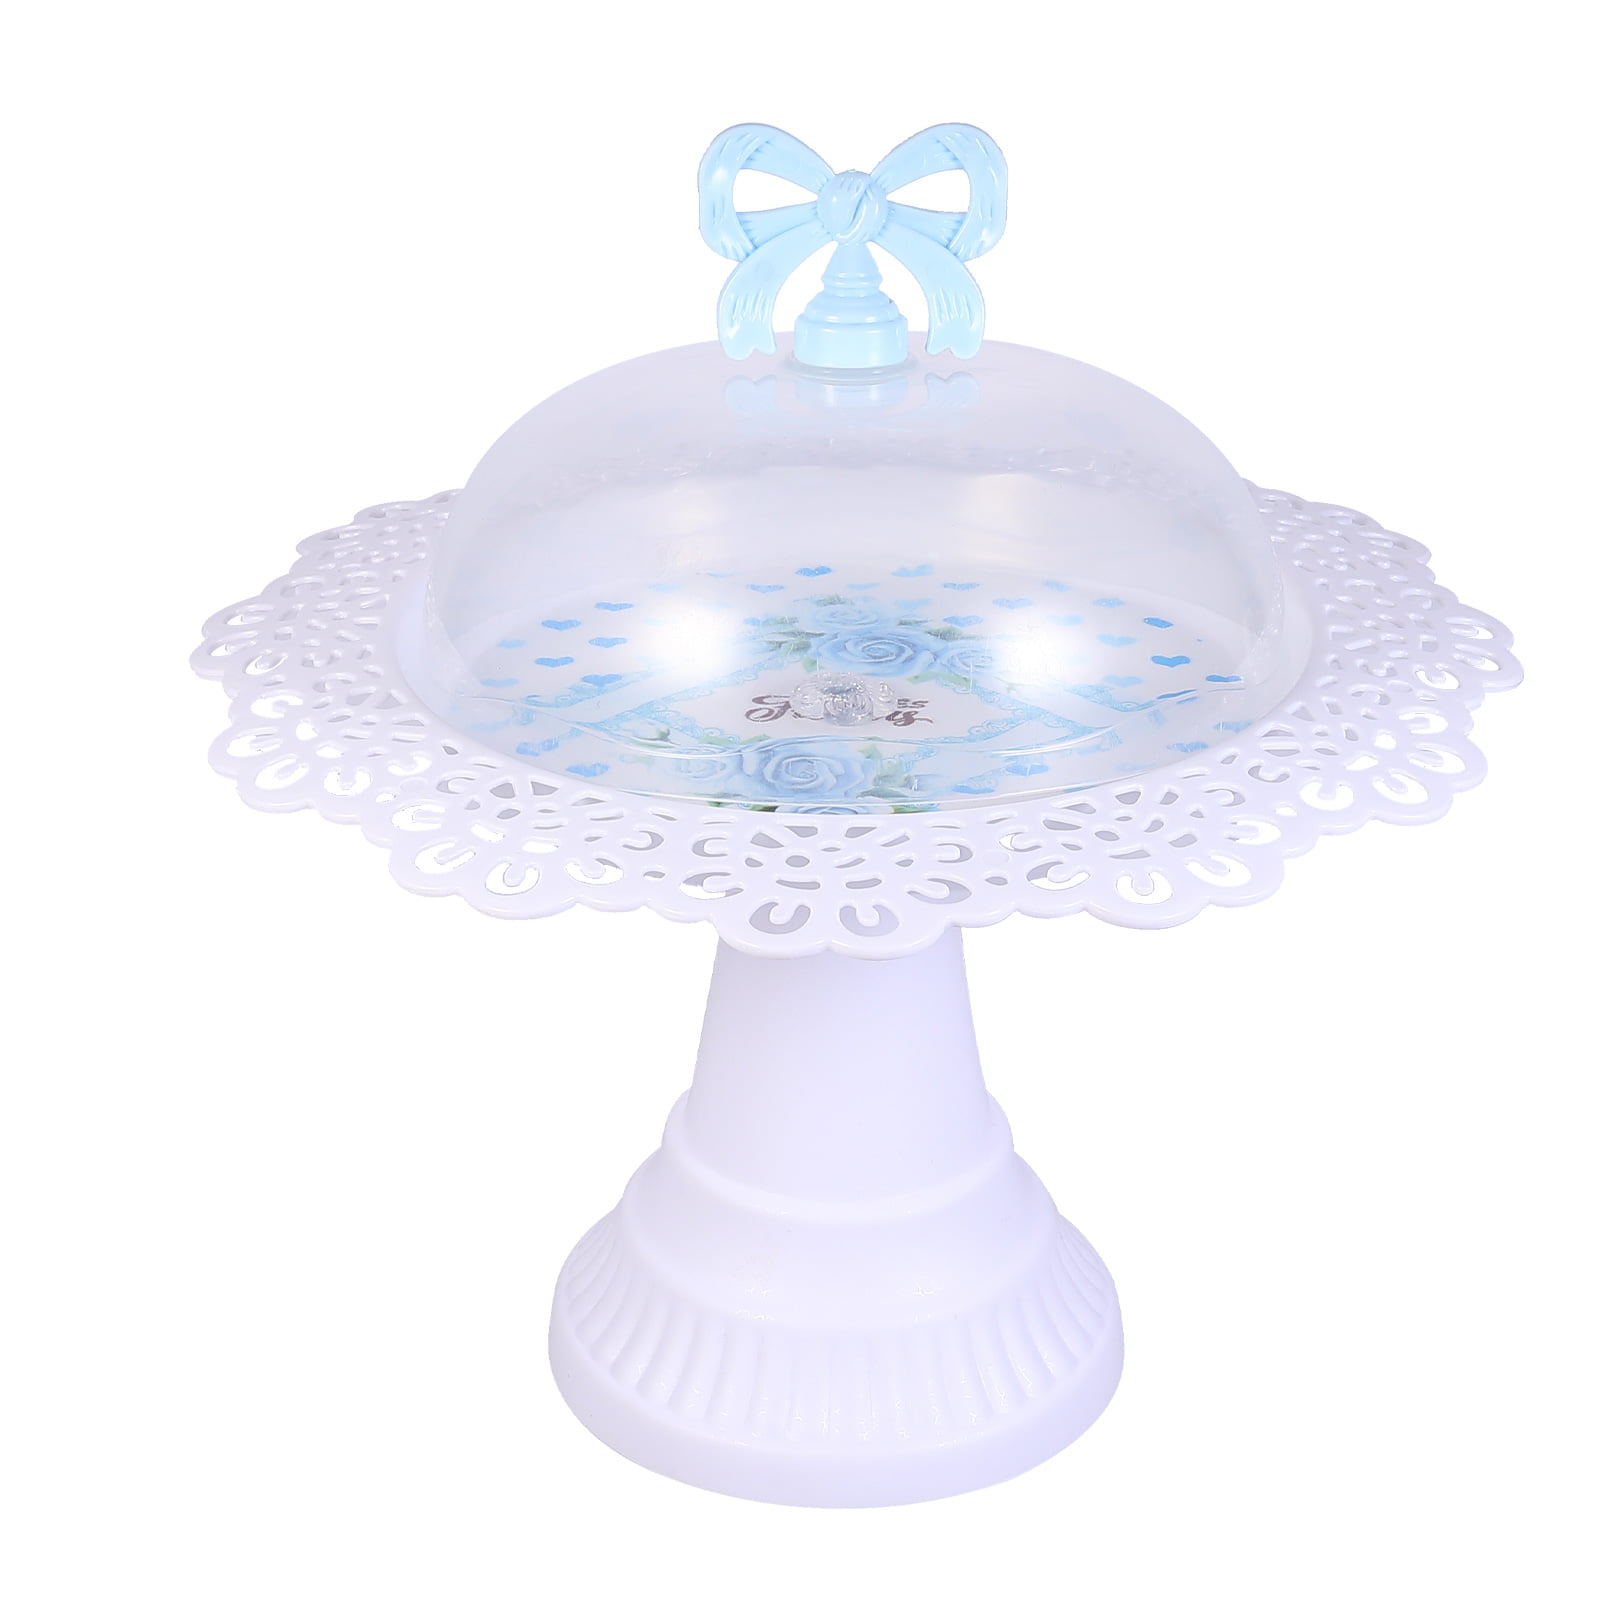 Details about   13" WHITE EMBOSSED  METAL CAKE STAND WITH COVERED DOME LID 